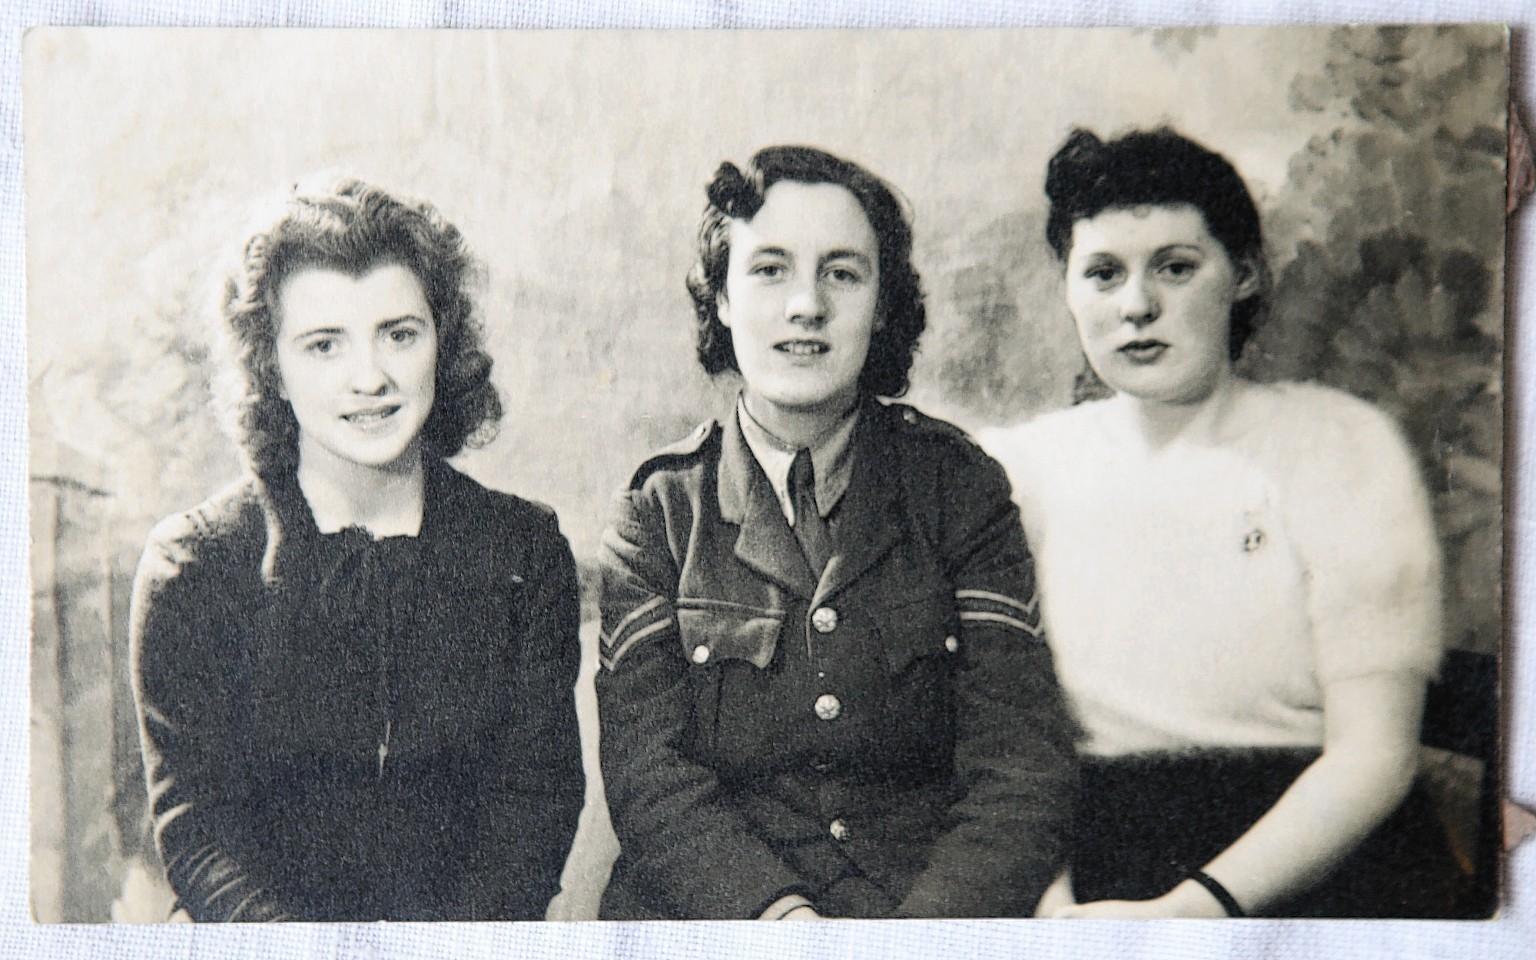 Christine Morrison (centre) with Marie Maclennan and Molly Ross, 1940.